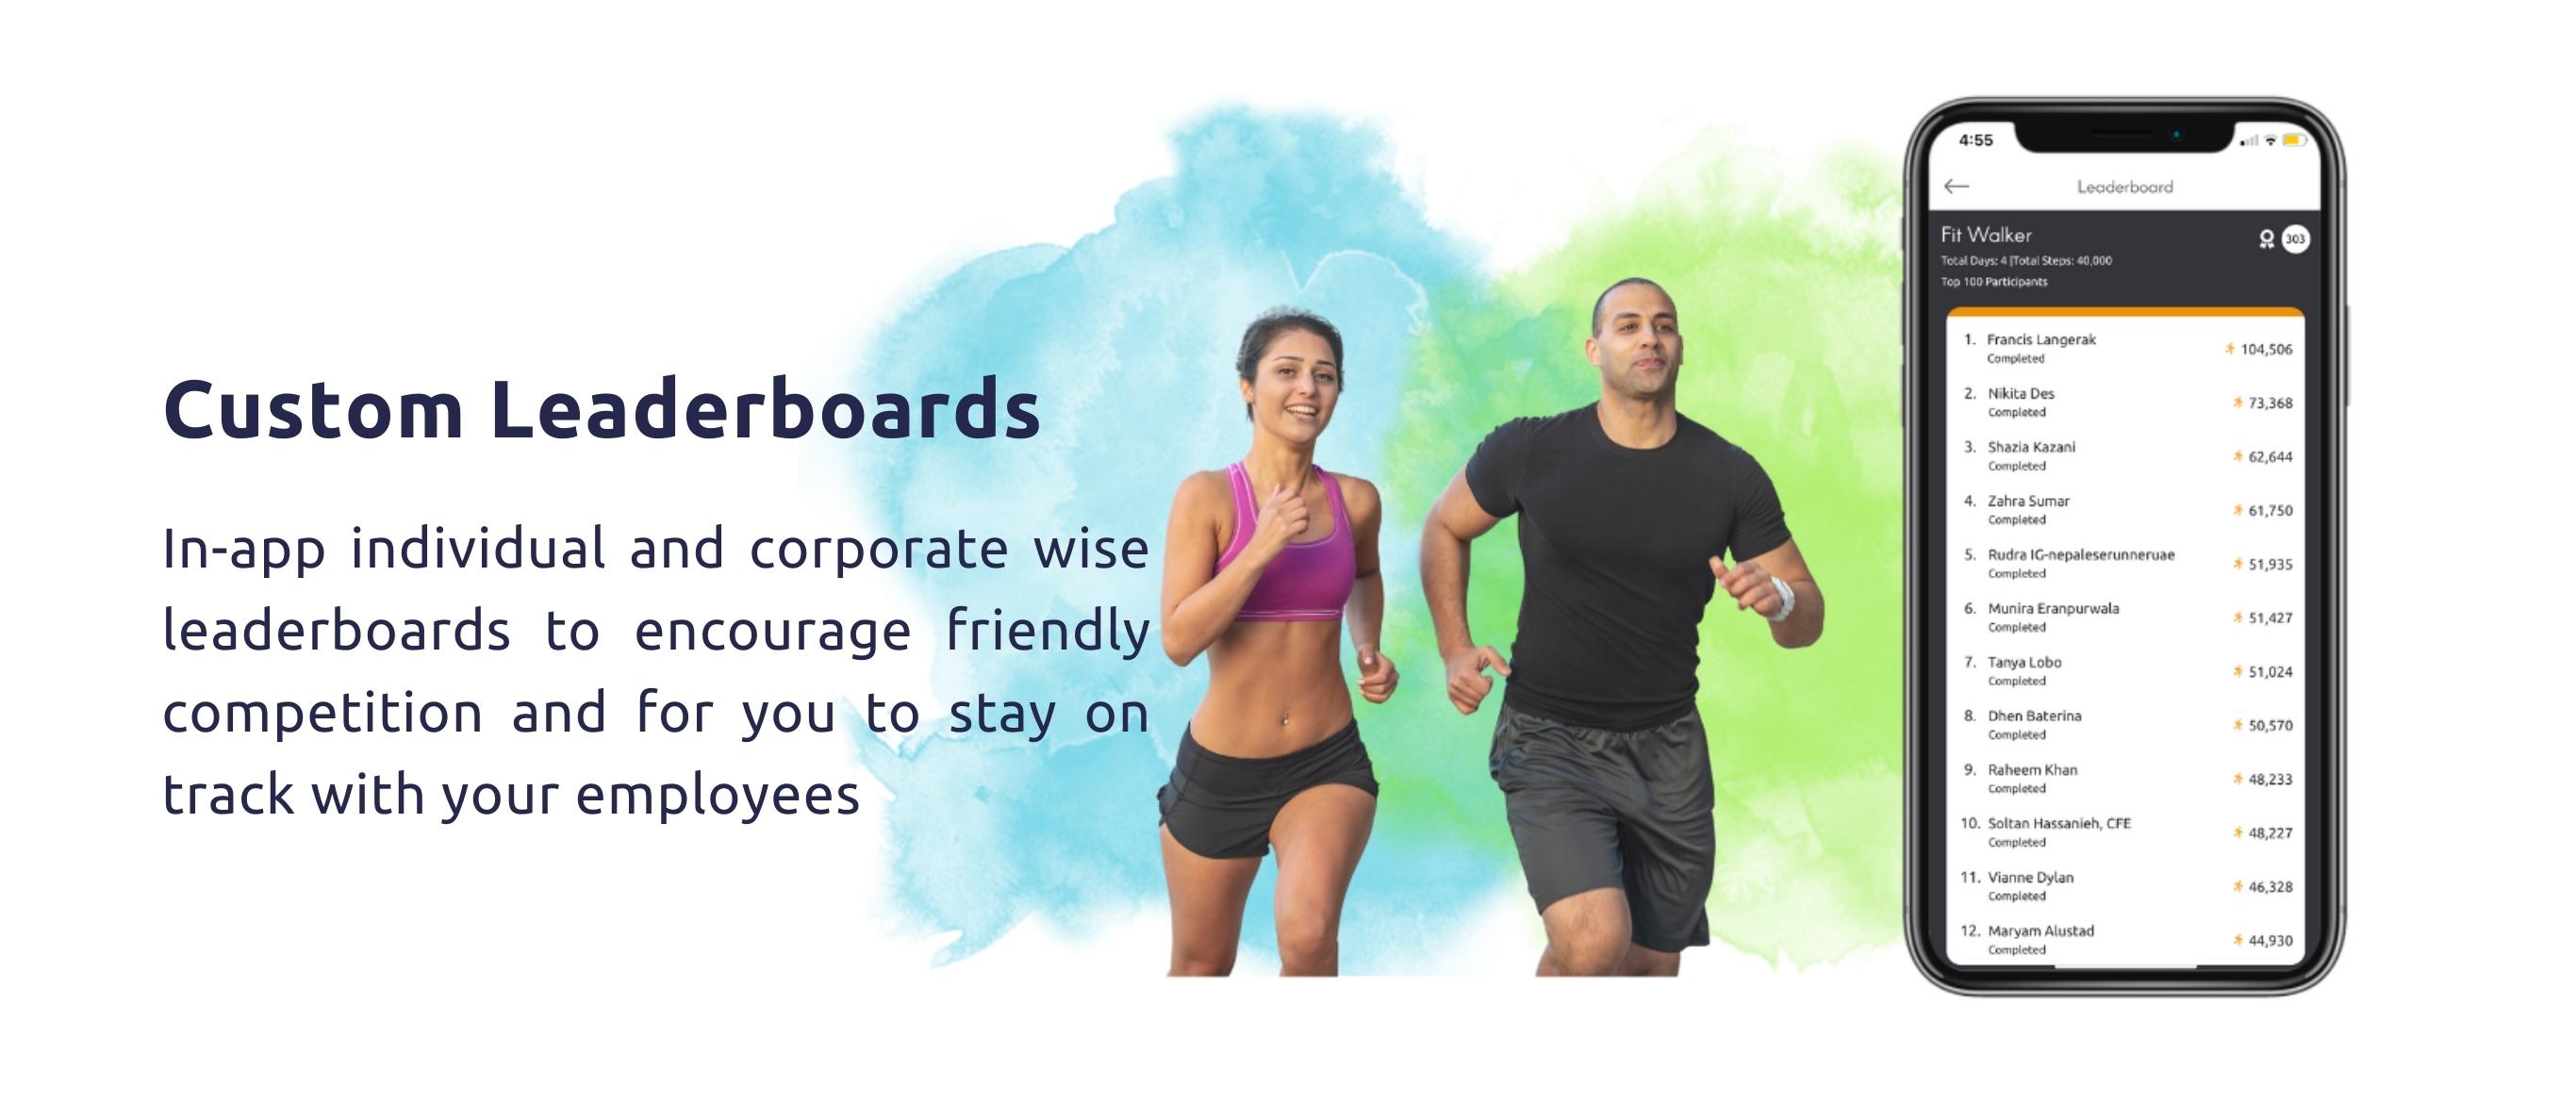 Custom Leaderboards.   In-app individual and corporate wise leaderboards to encourage friendly competition and for you to stay on track with your employees 